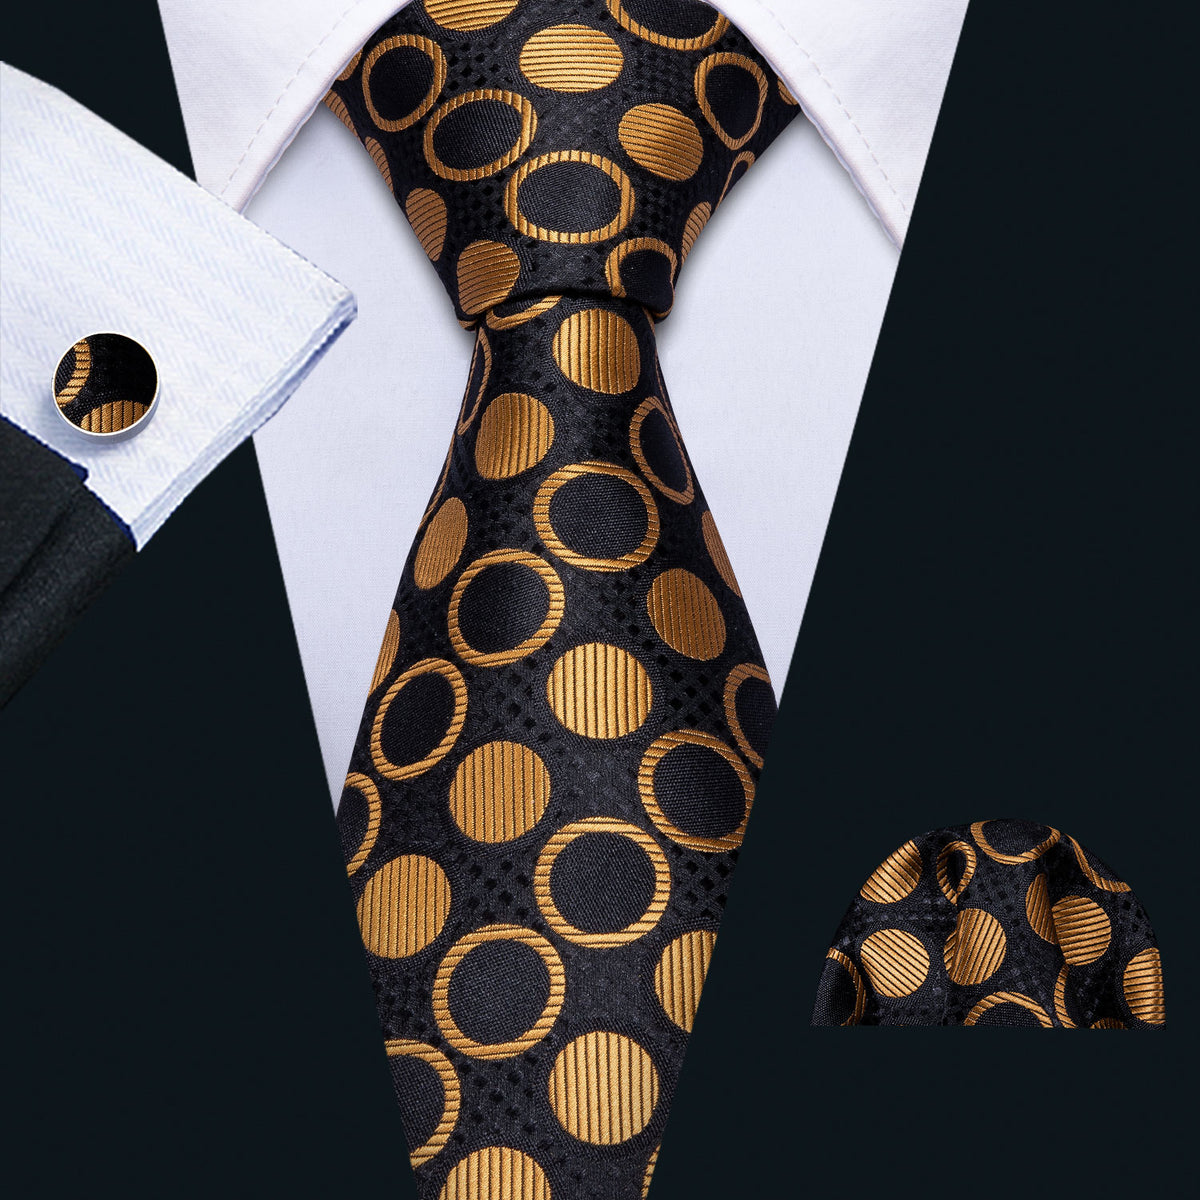 Gold Circles Tie, Pocket Square and Cufflinks – Sophisticated Gentlemen